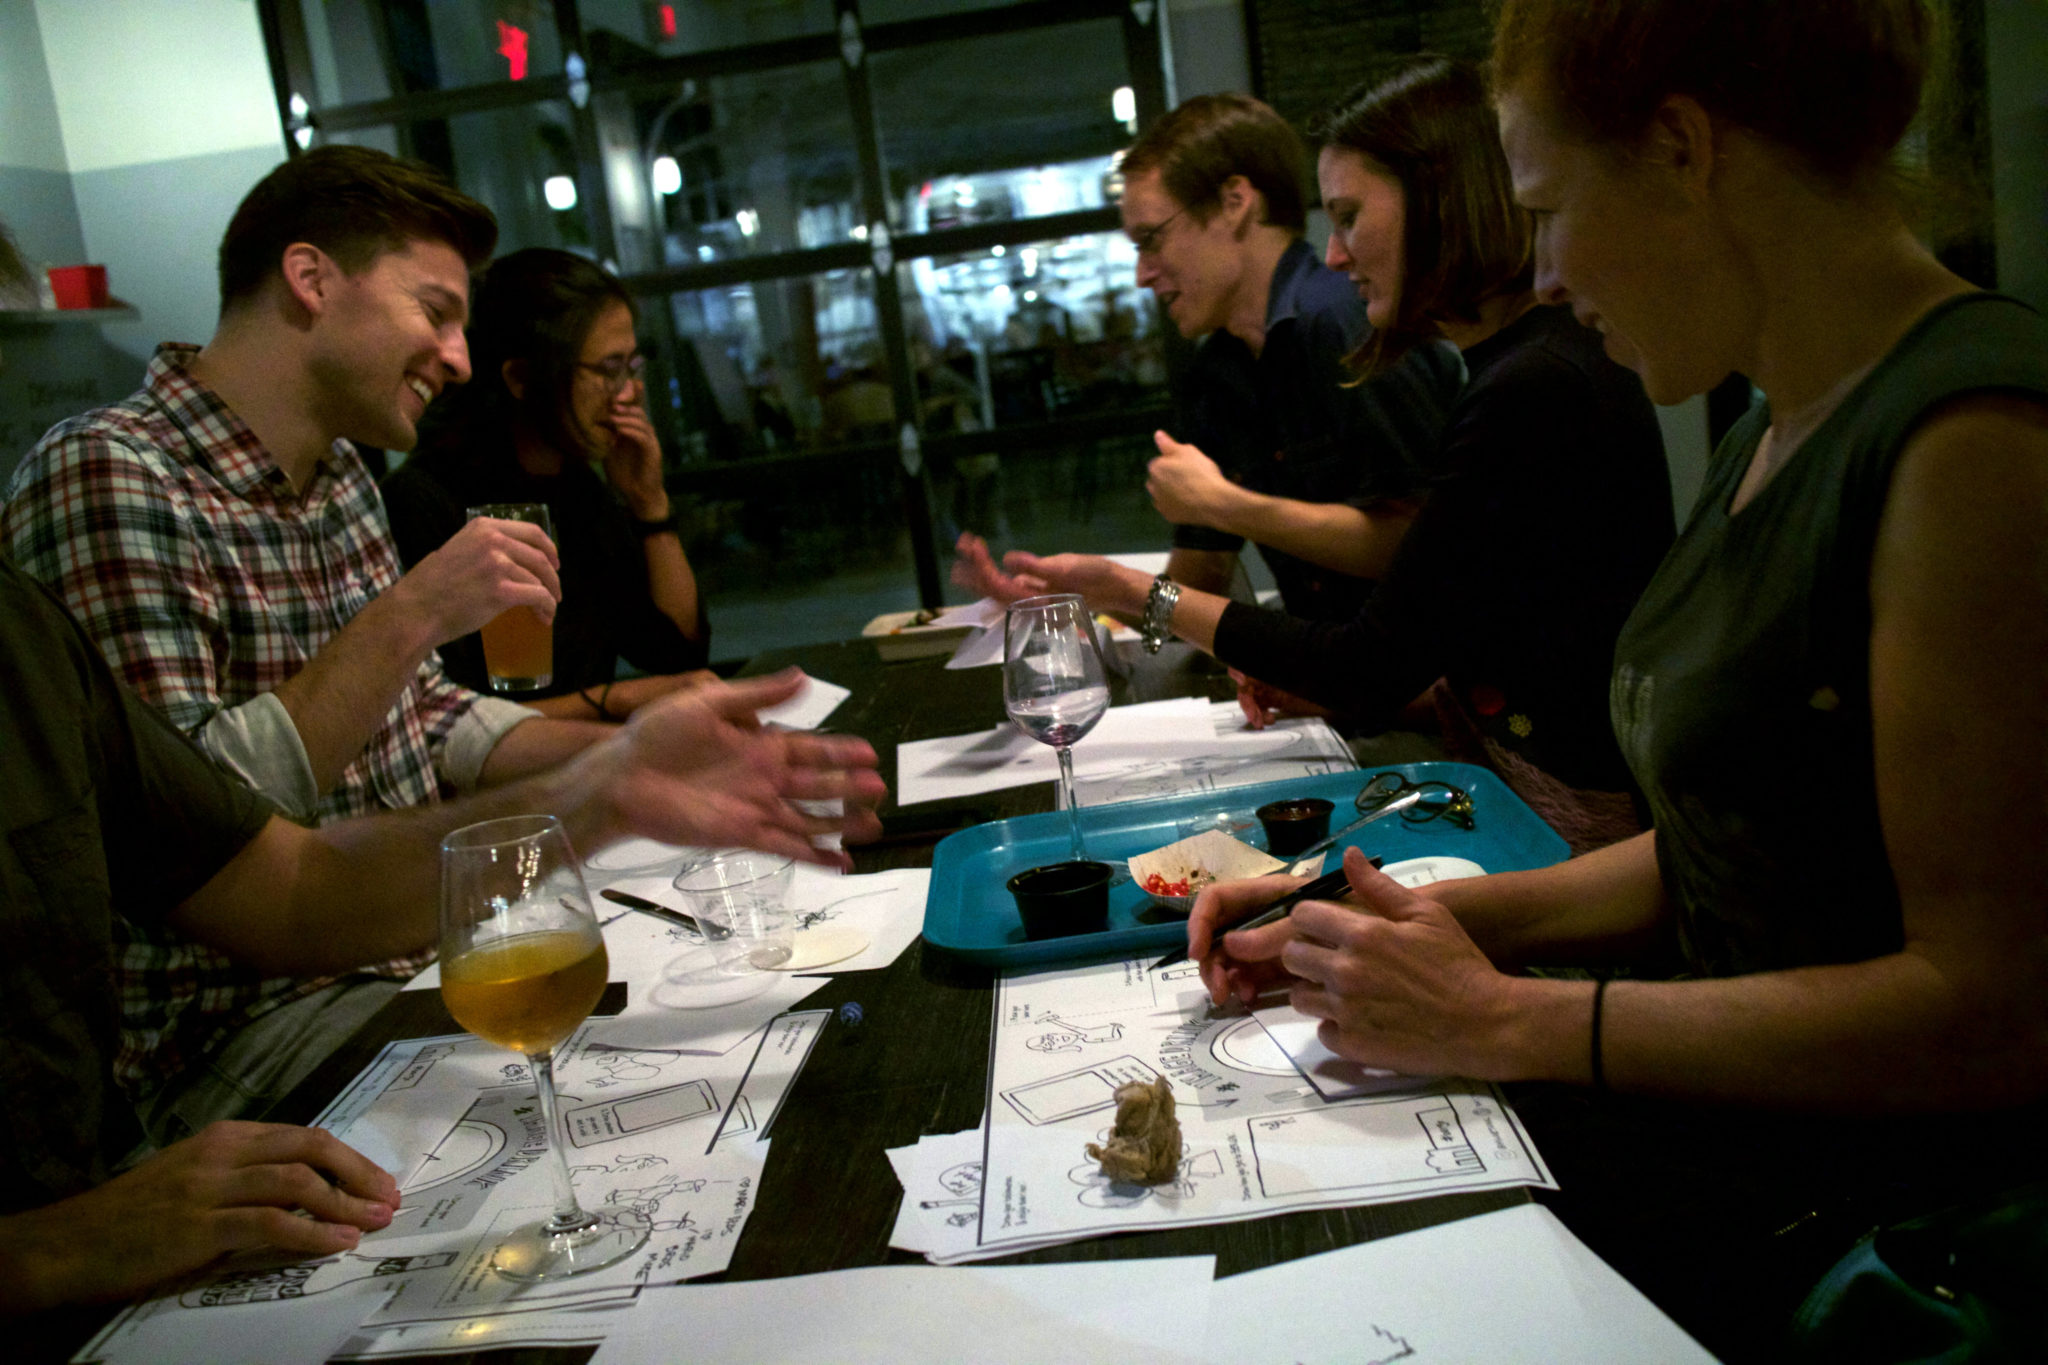 imagethink drink and draw attendees